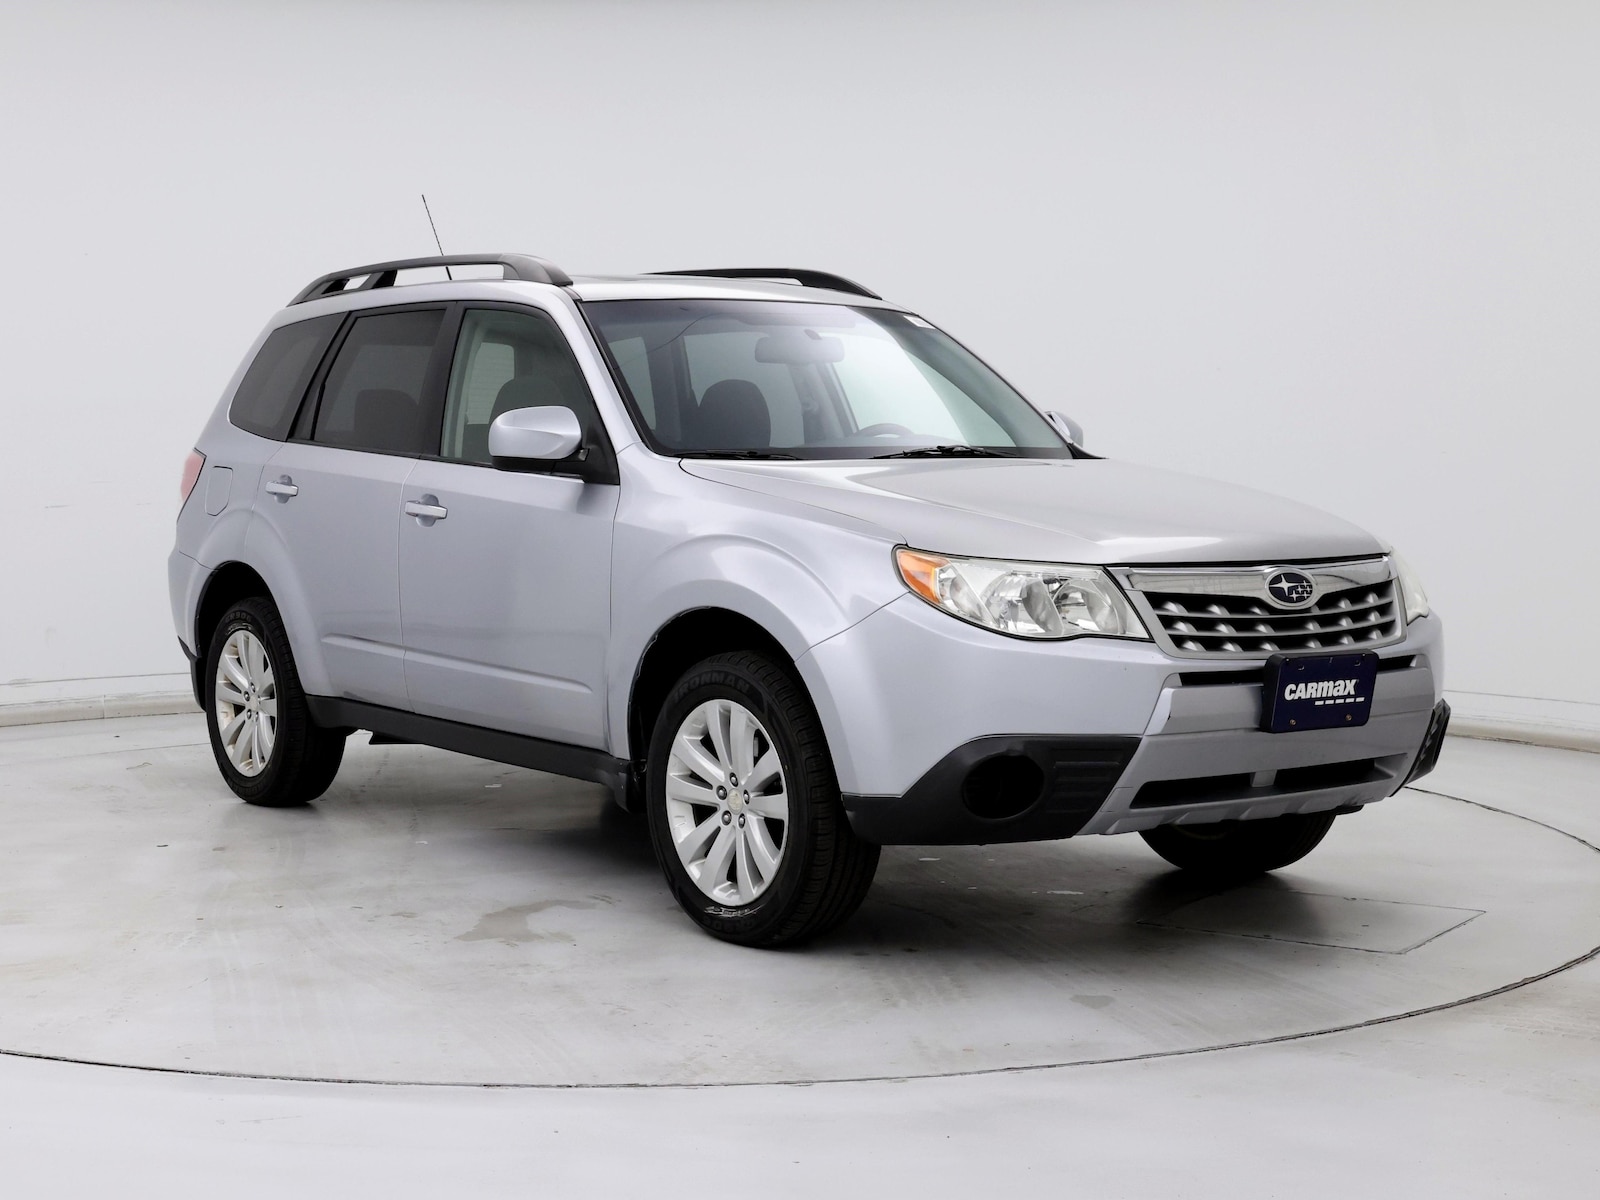 Used 2012 Subaru Forester X Premium Package with VIN JF2SHBDCXCH402181 for sale in Spokane Valley, WA